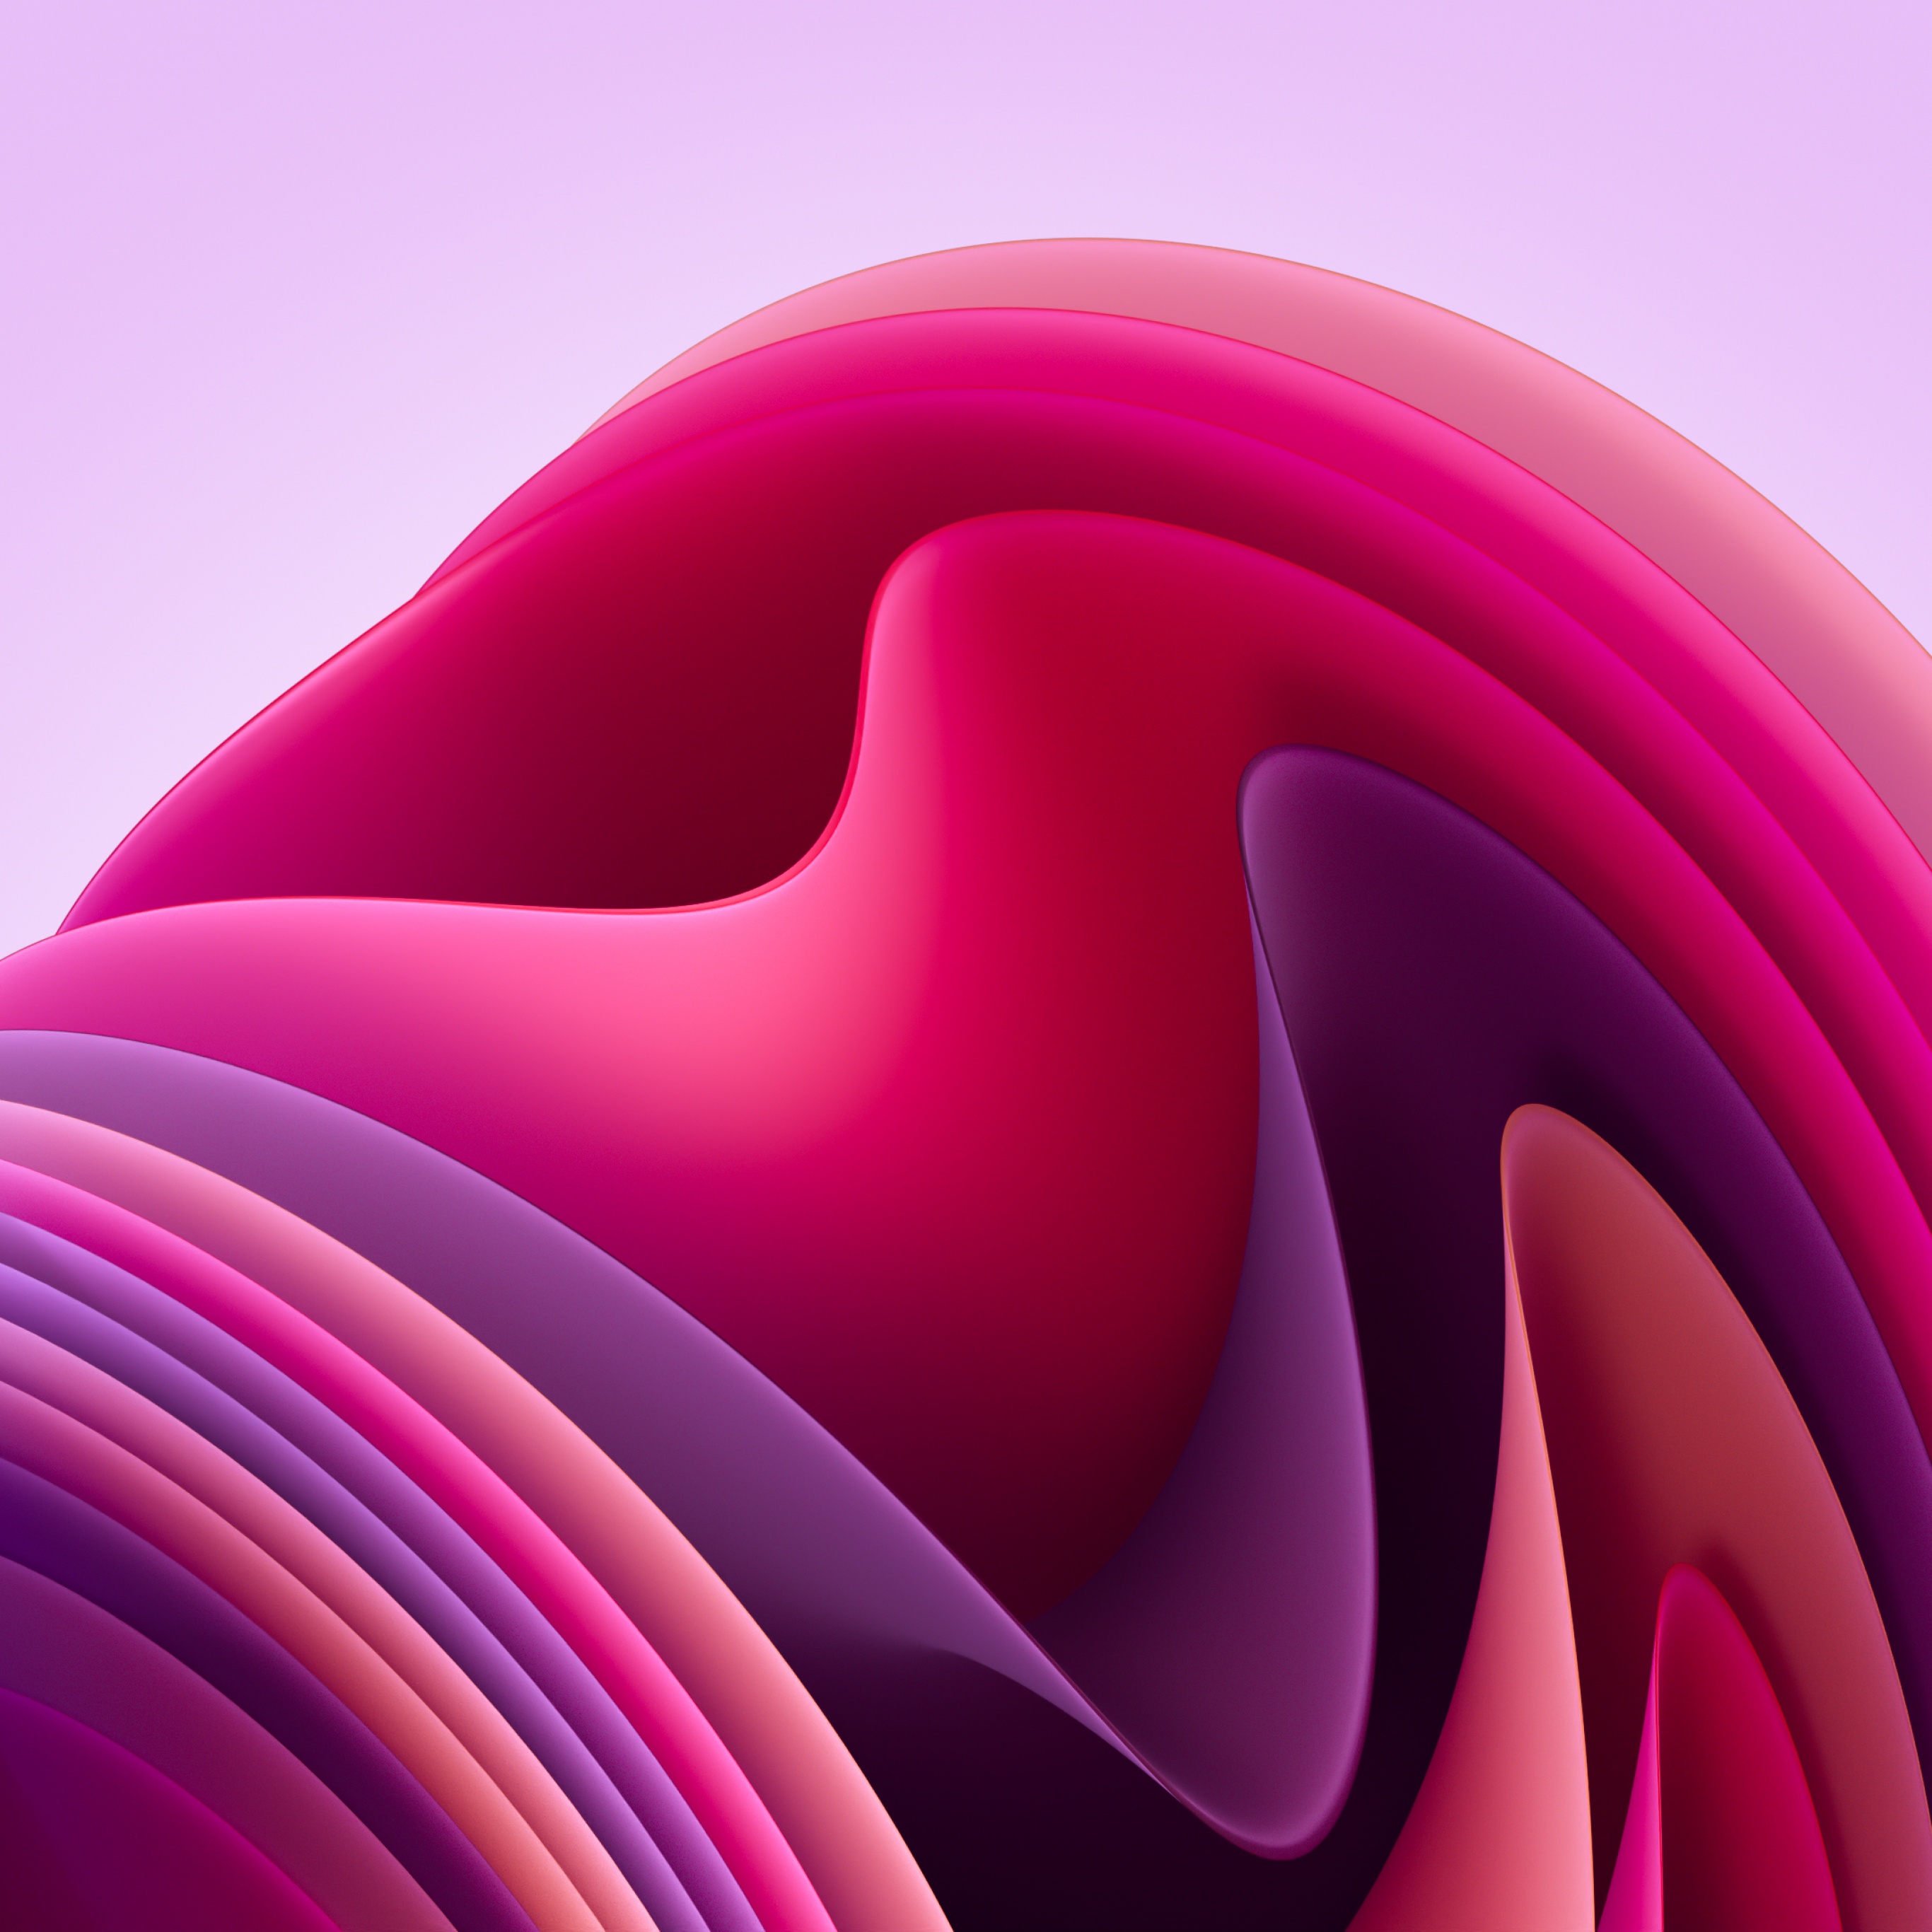 Download wallpaper 3415x3415 stripes blur abstraction pink pastel ipad  pro 129 retina for parallax hd background